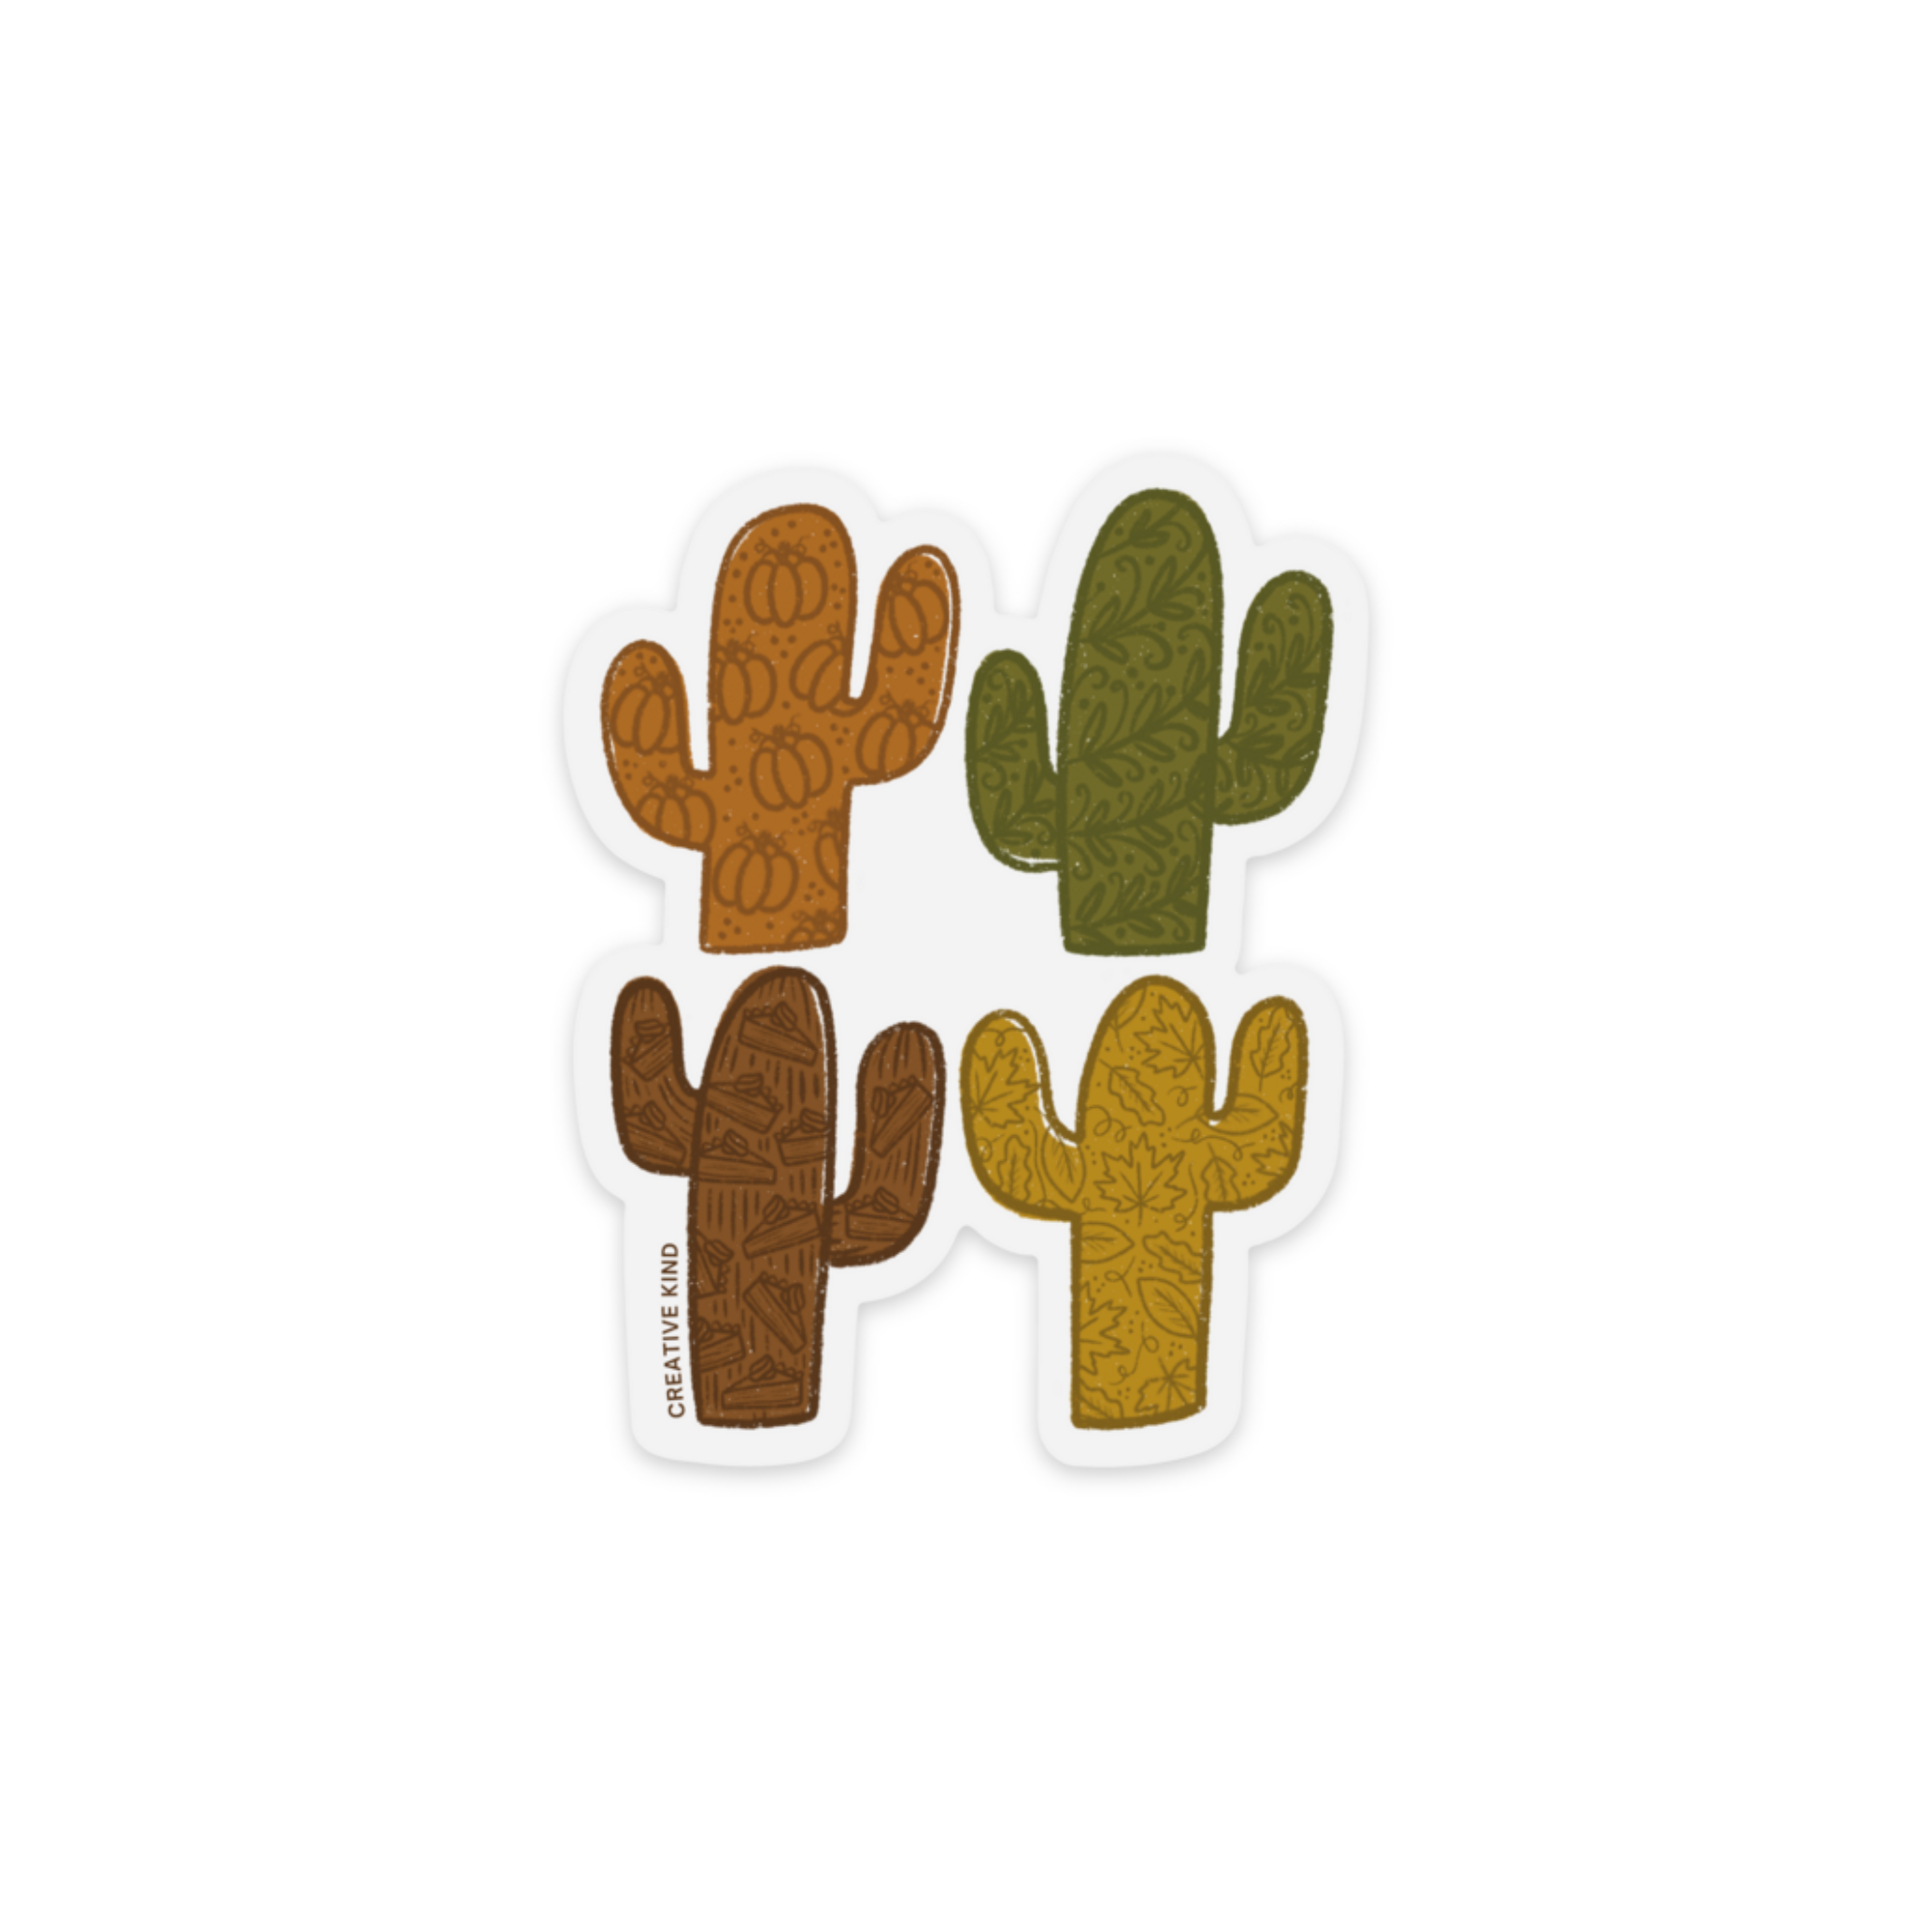 Clear vinyl sticker of four saguaro cactus in orange, green, brown, and yellow with fall sketches on the cacti